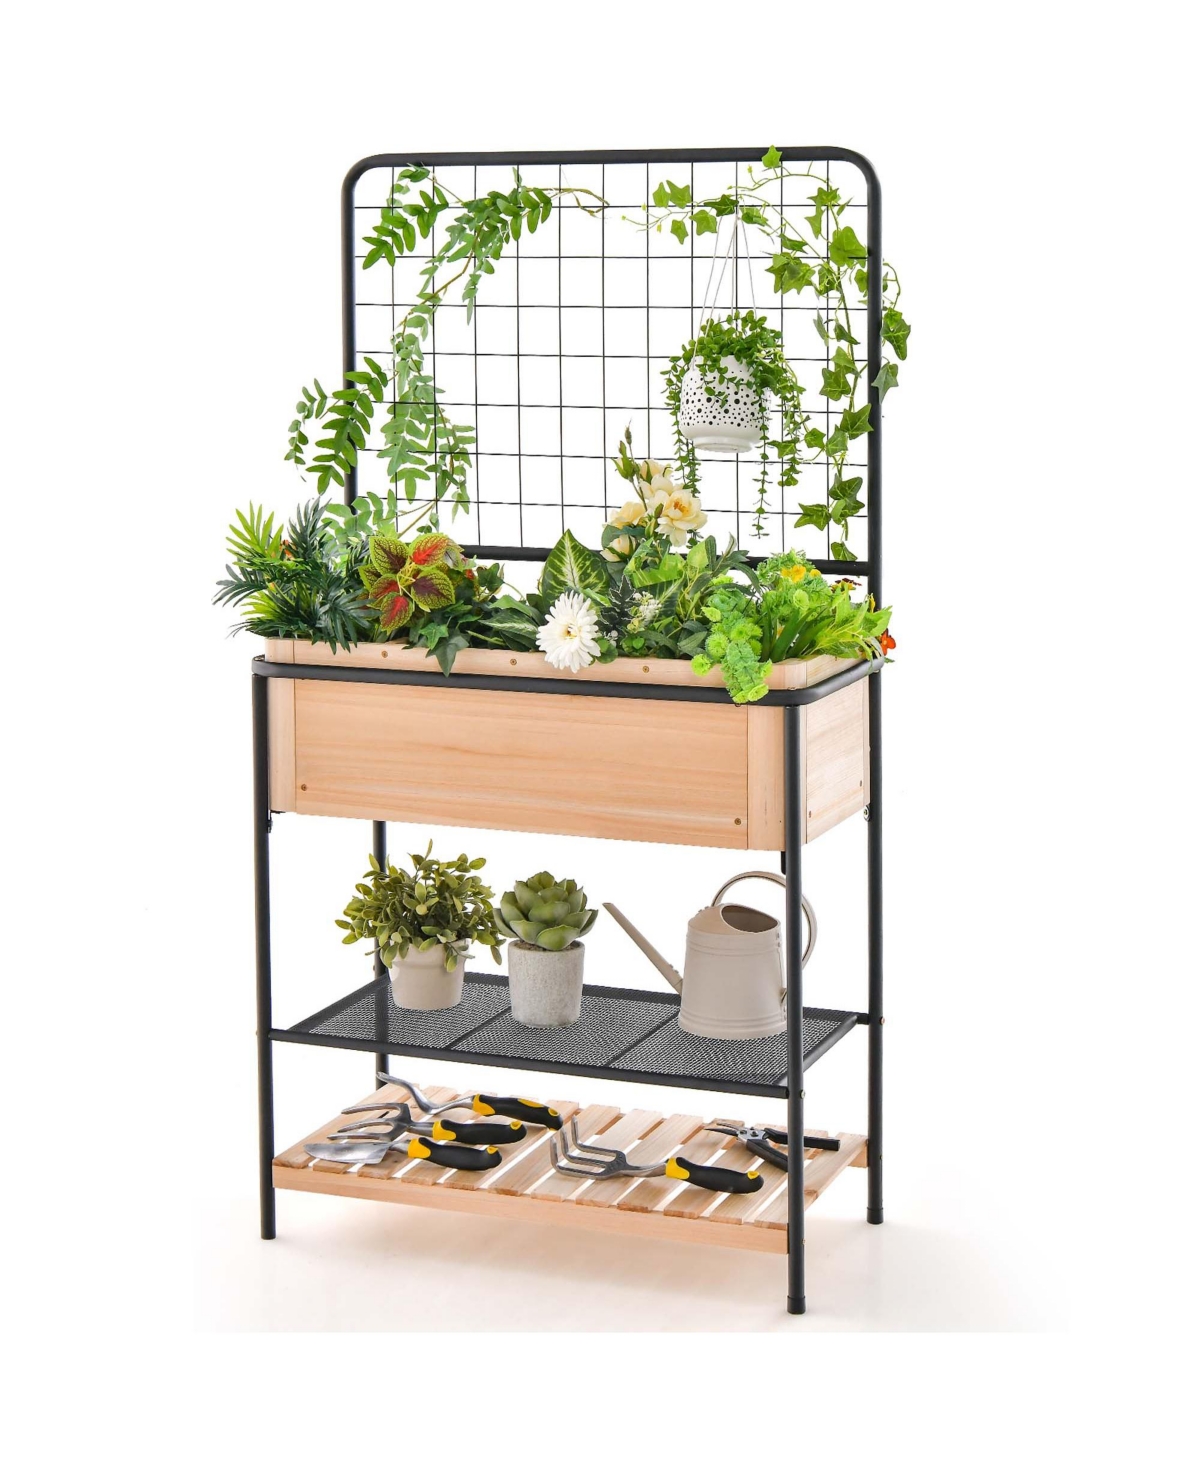 59" Raised Wooden Garden Bed with Metal Trellis Open Storage Shelves Drain Holes - Natural